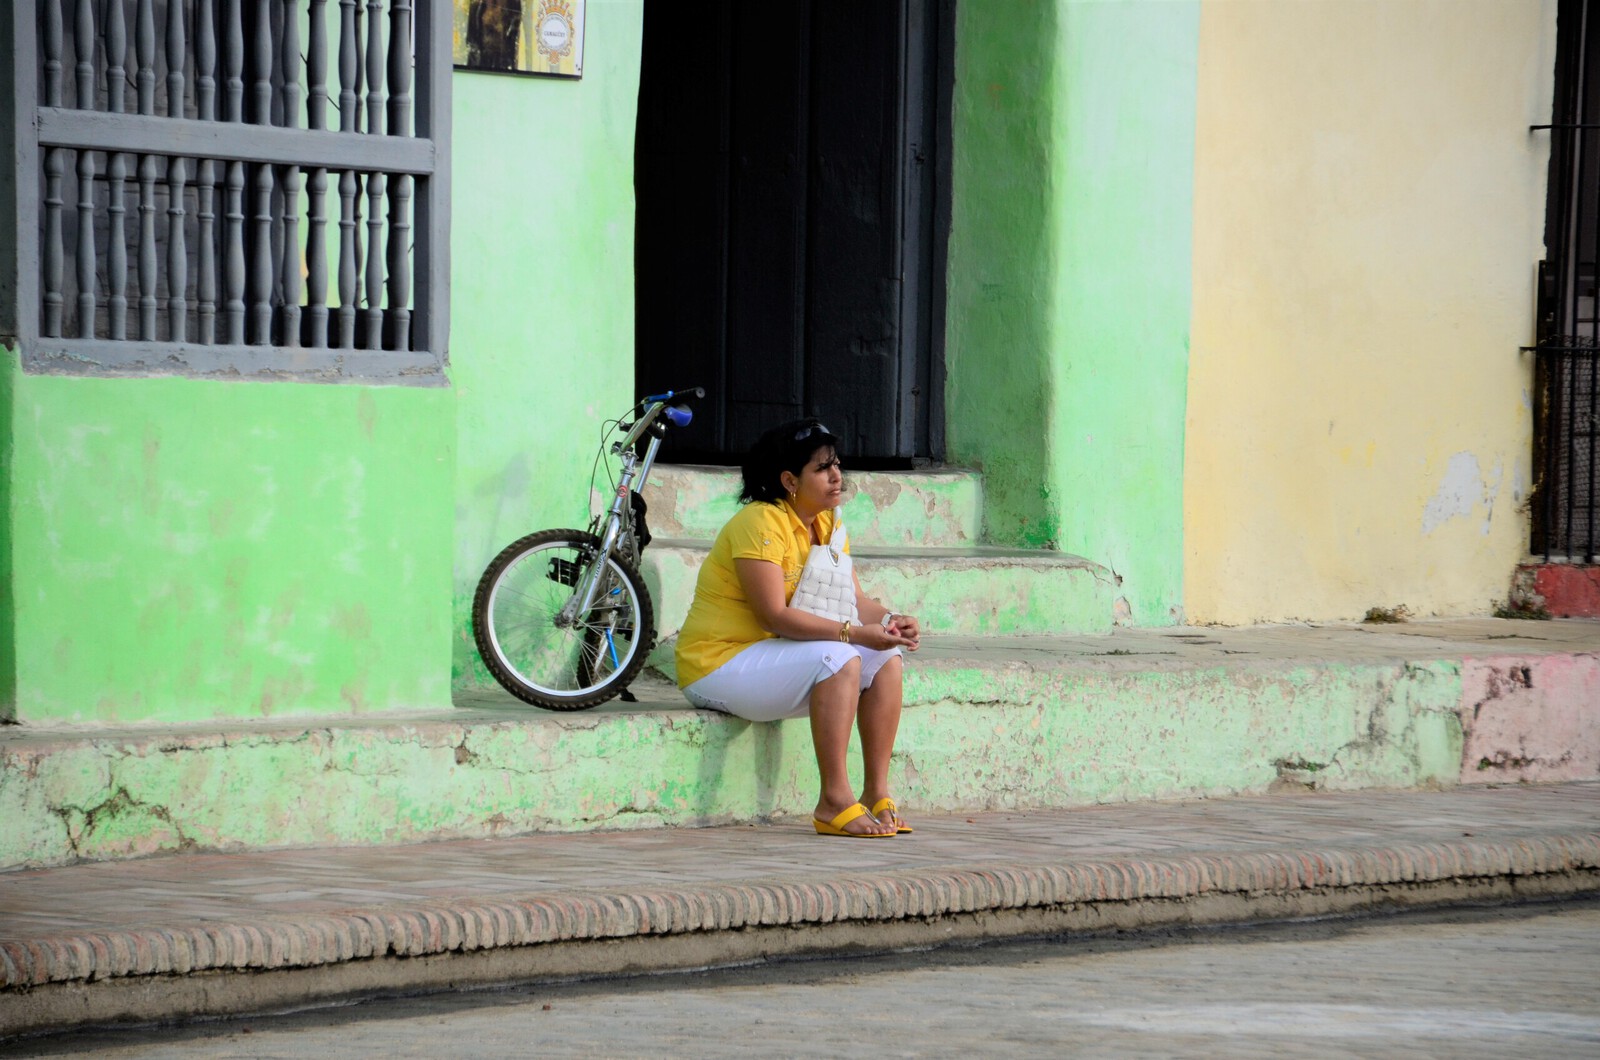 Humans of the world 13/Cuba